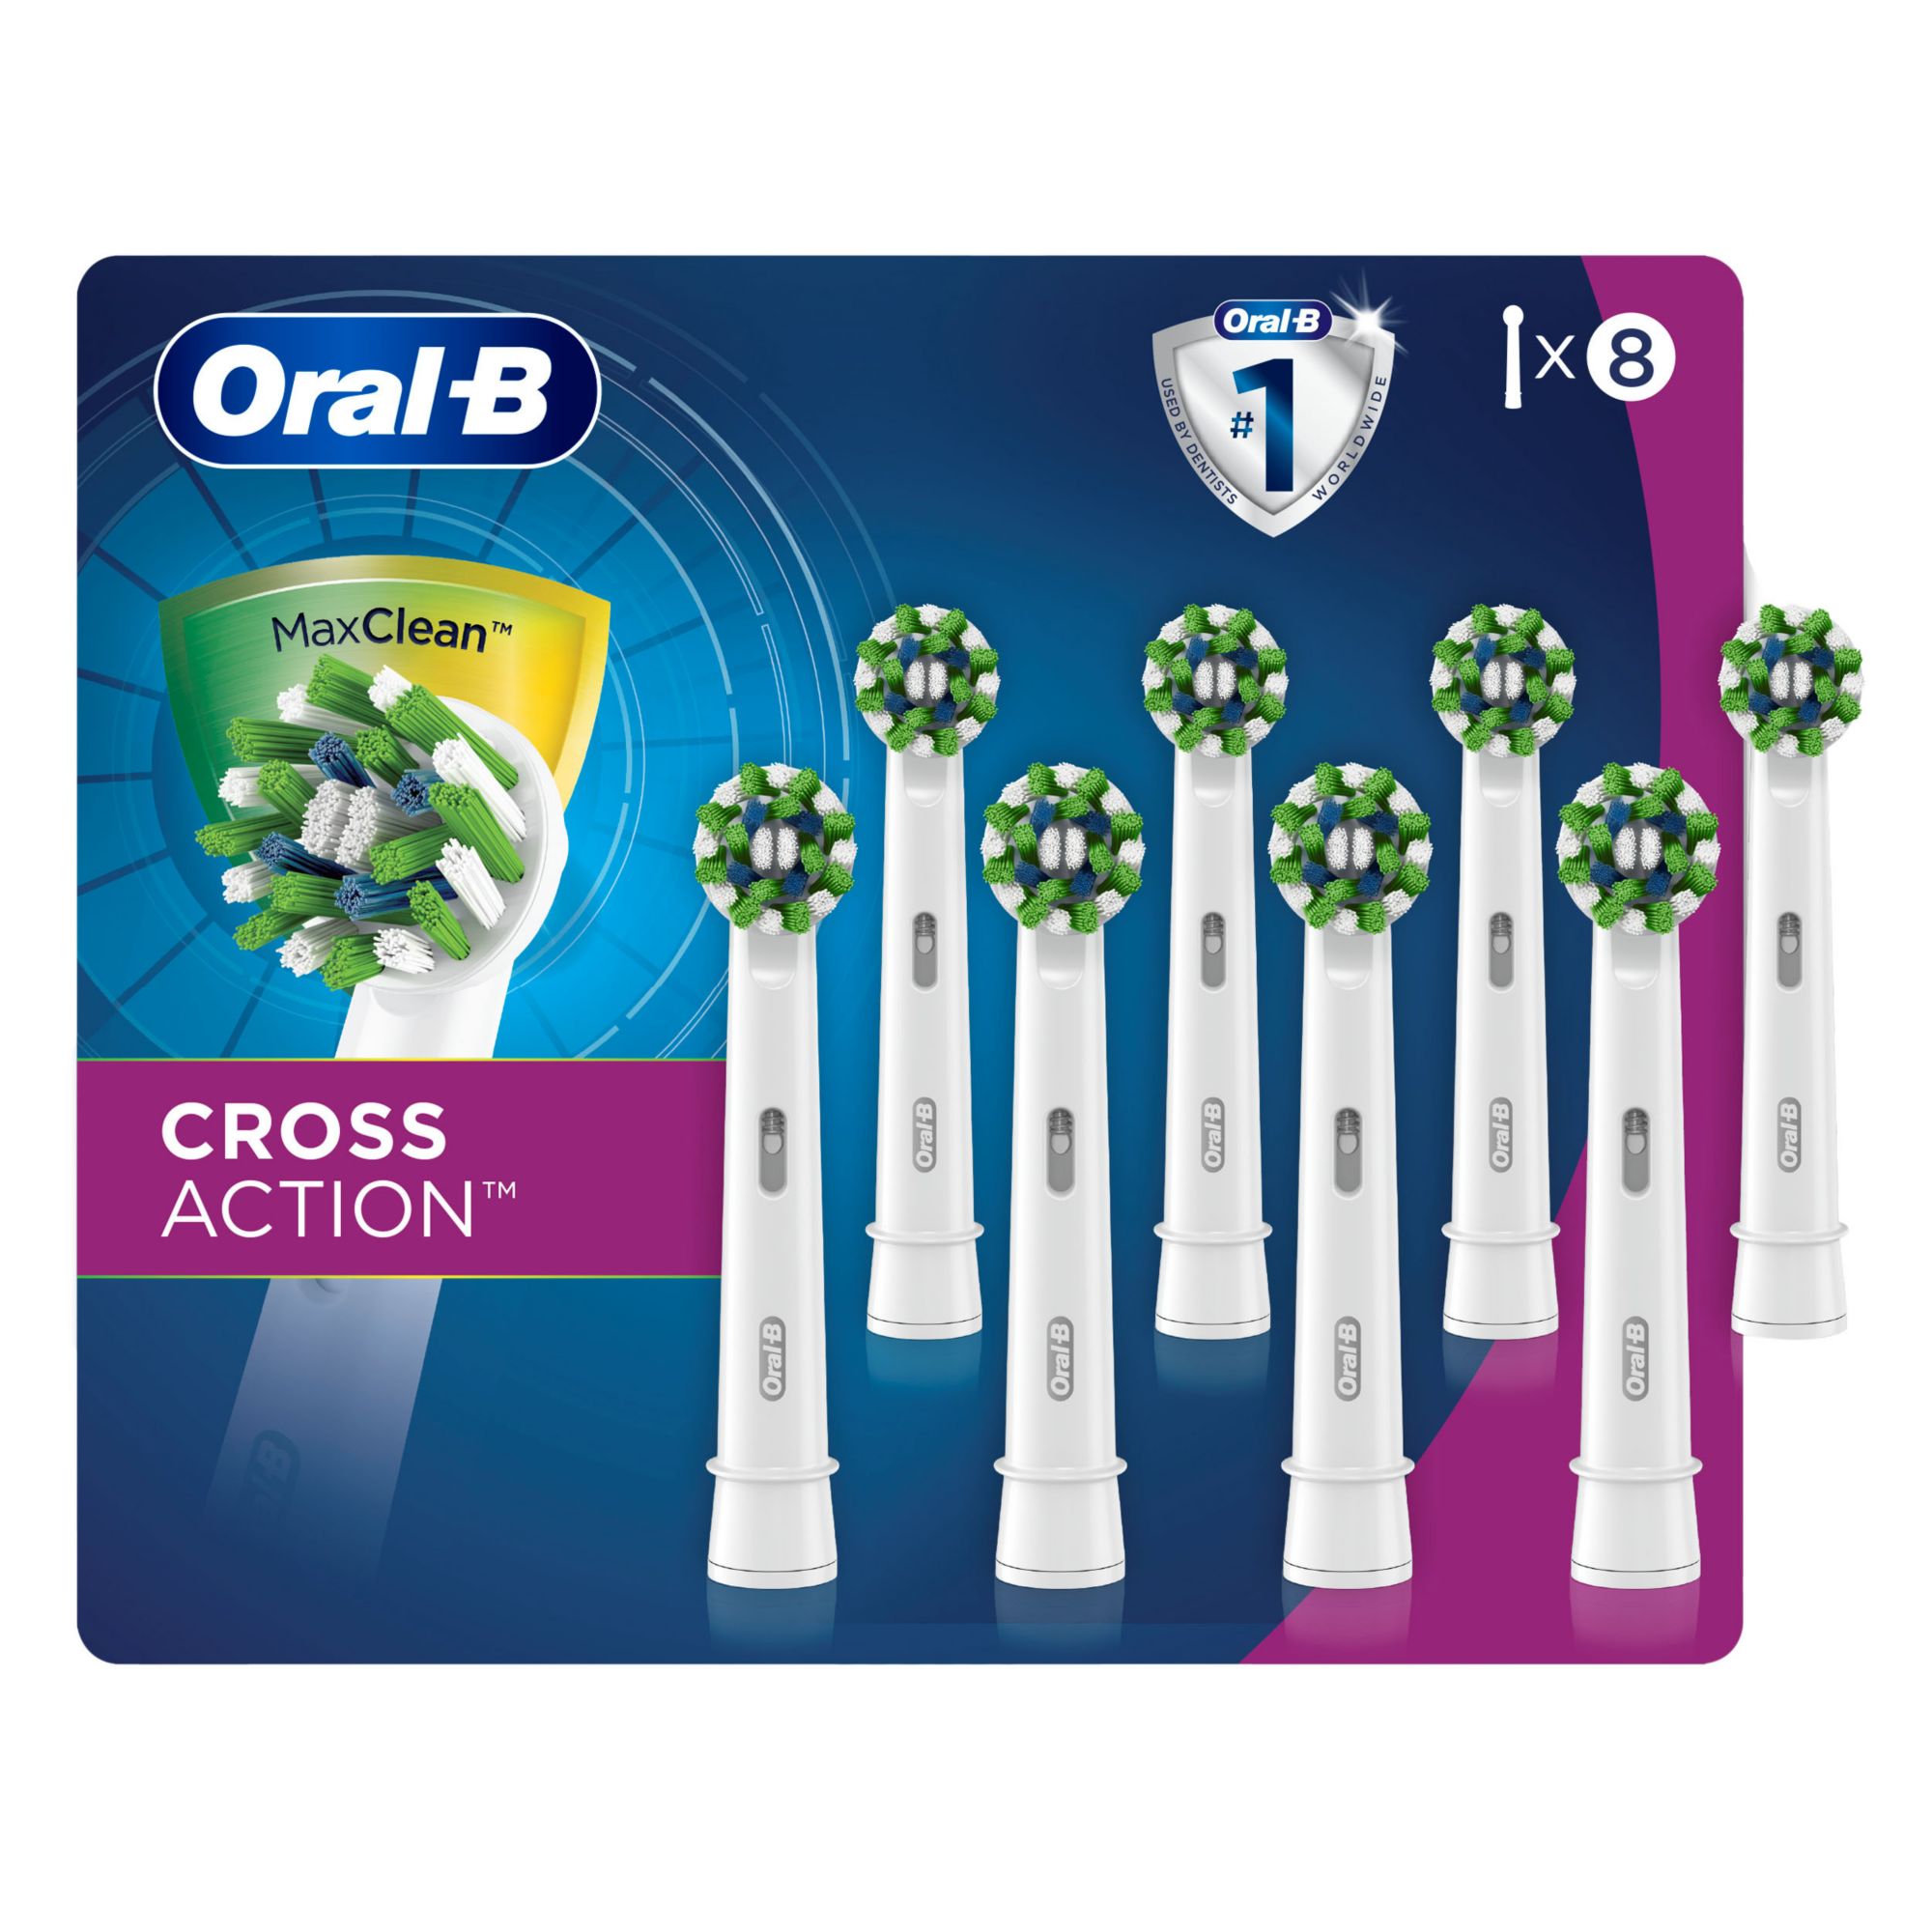 Oral-B CrossAction Electric Toothbrush Replacement Brush Heads, 8 ct.